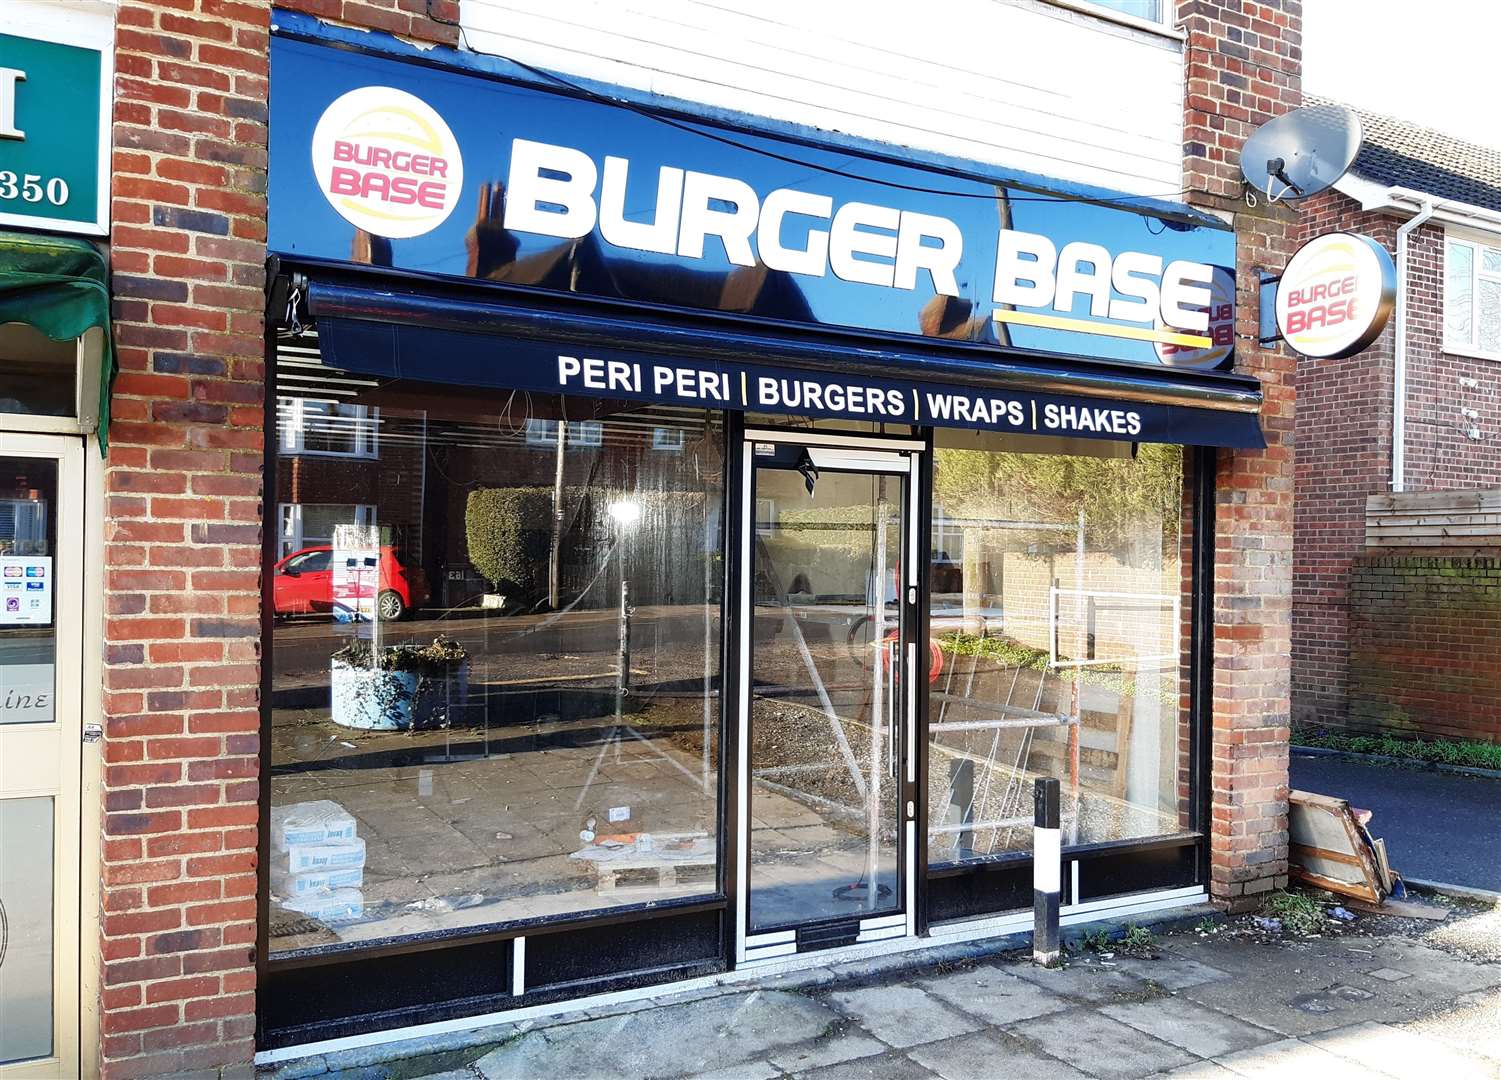 How the Burger Base site looked in January